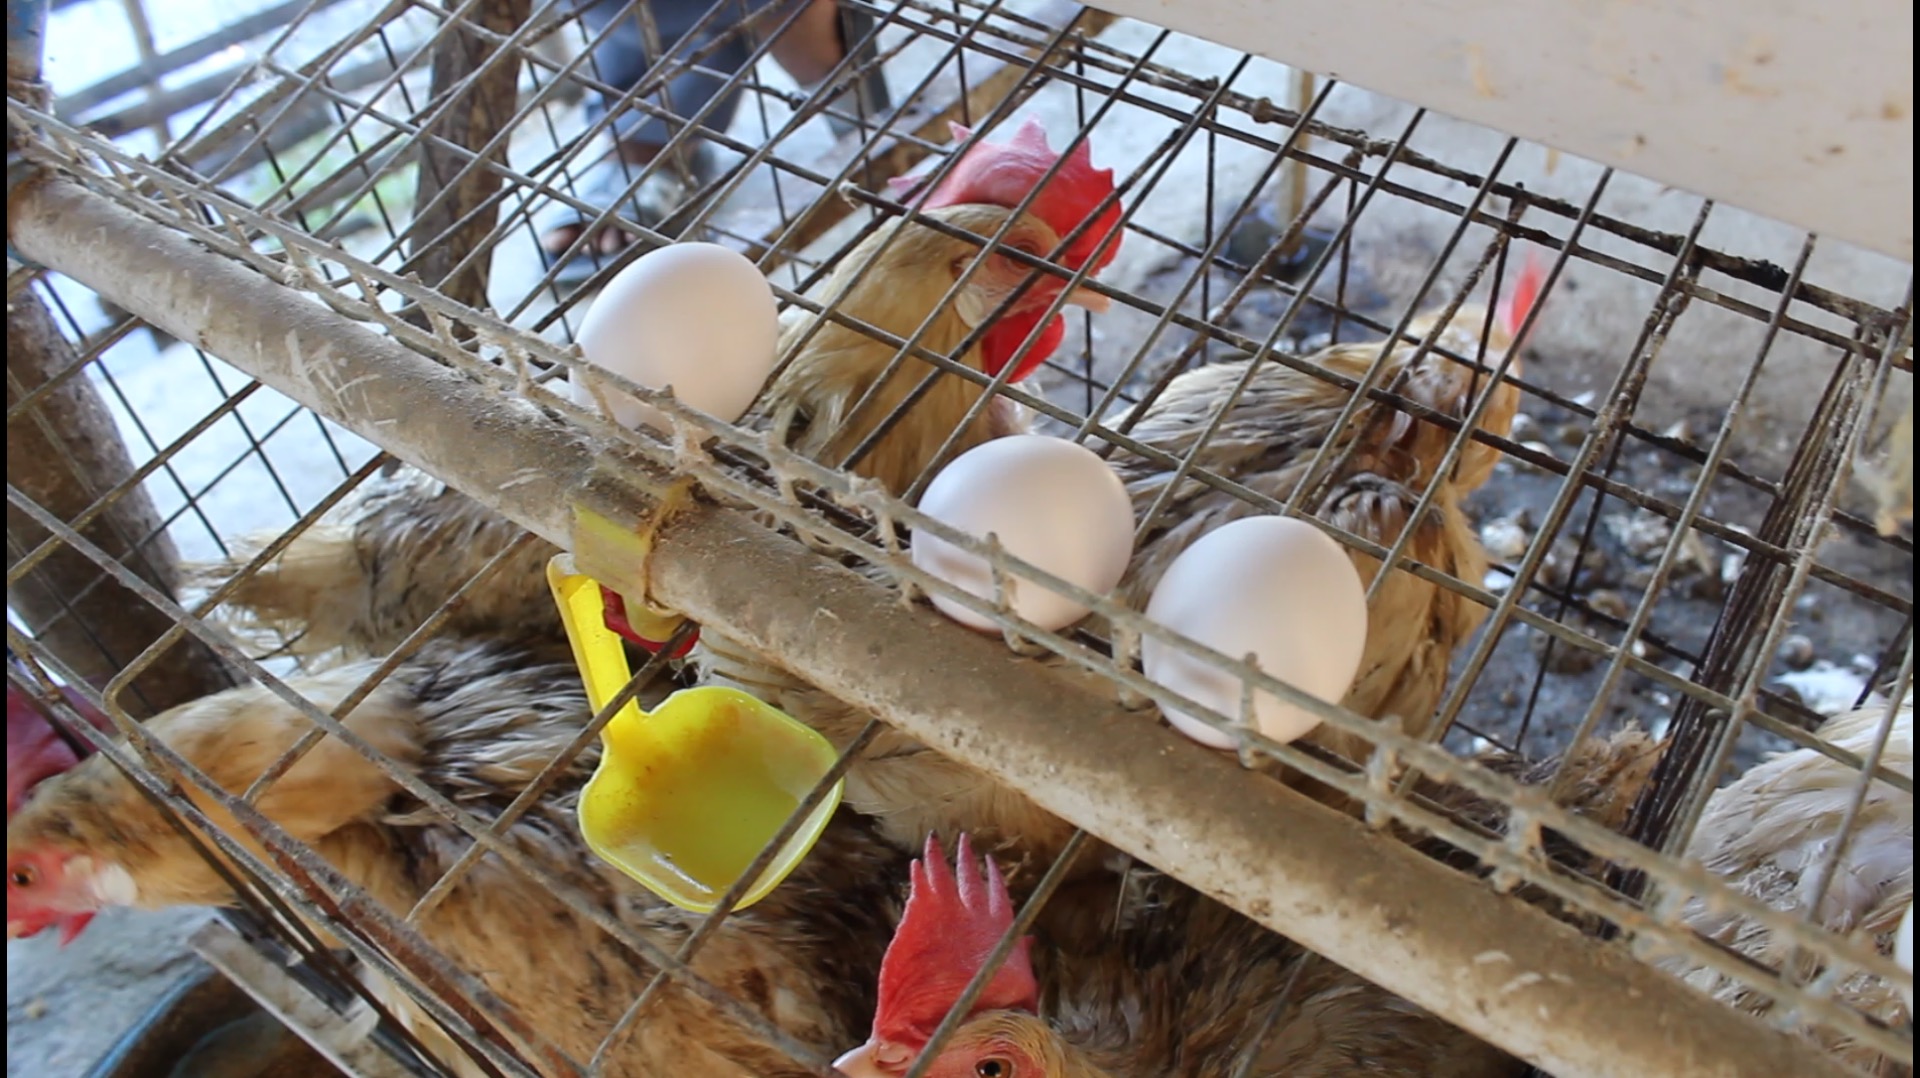 Maeling Poultry Farmers Association thrives with a 1.1 million pesos gross income from July to December egg harvest